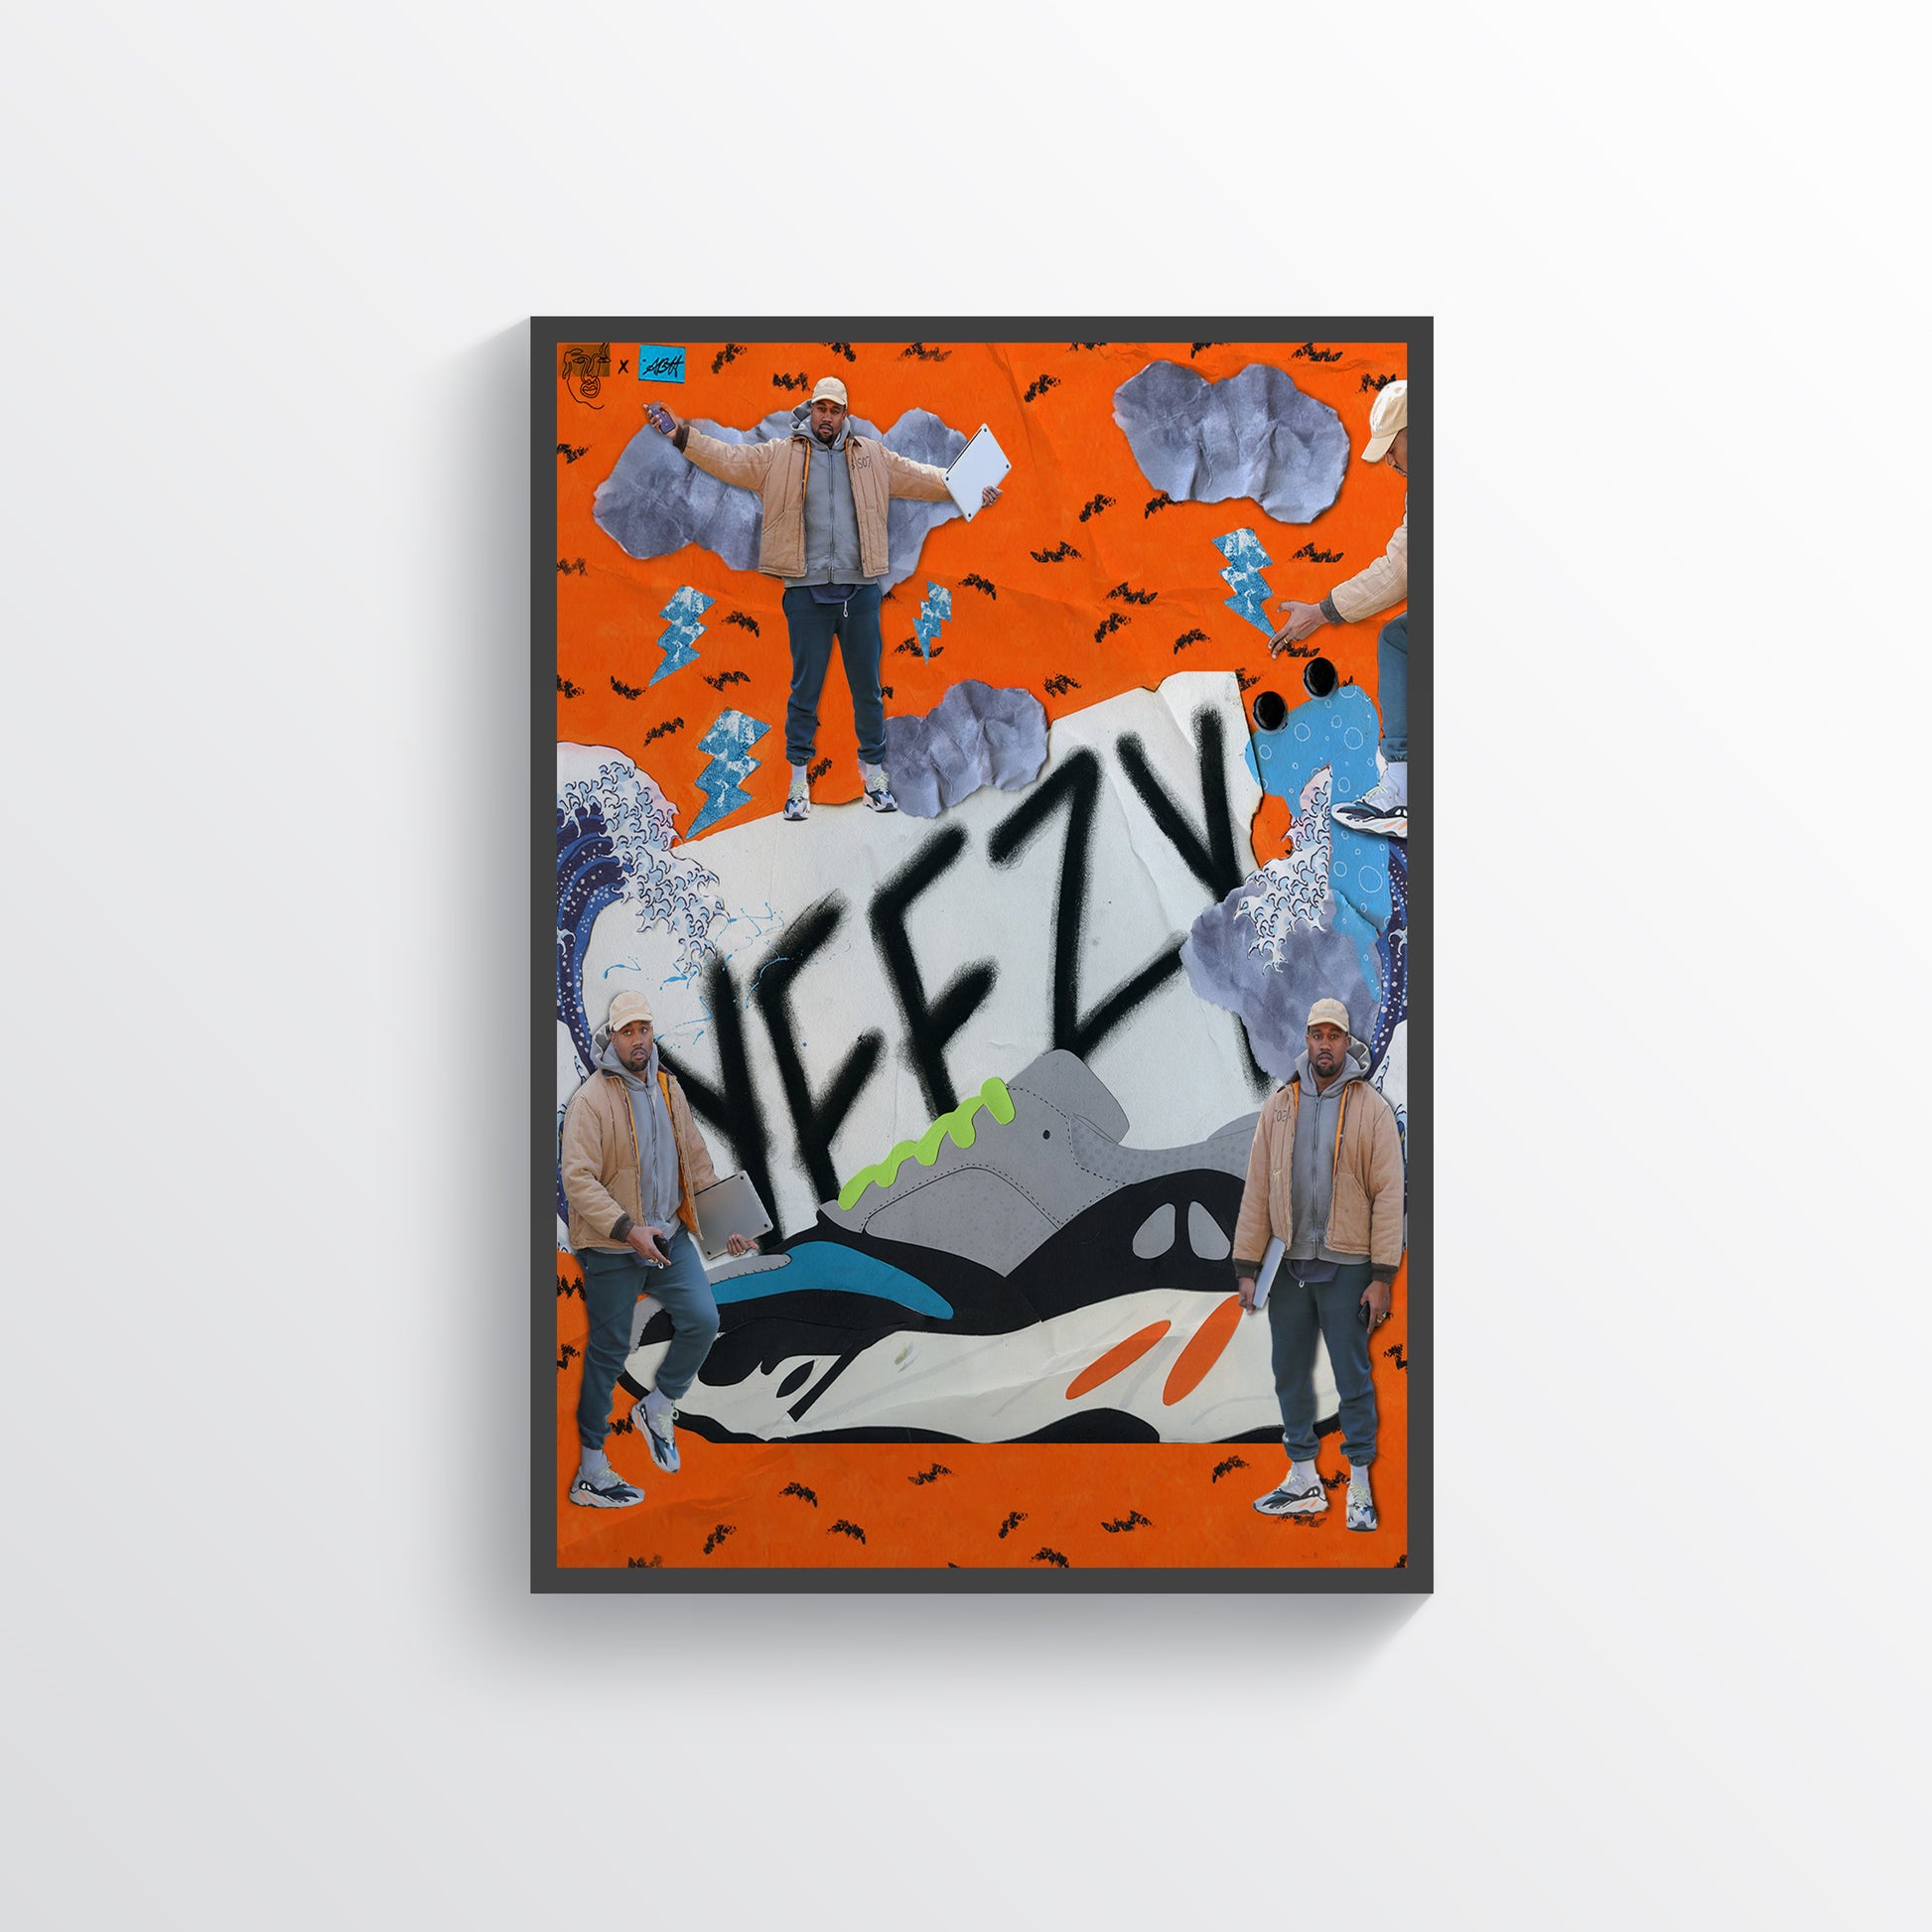 Kanye West Poster, 24posters